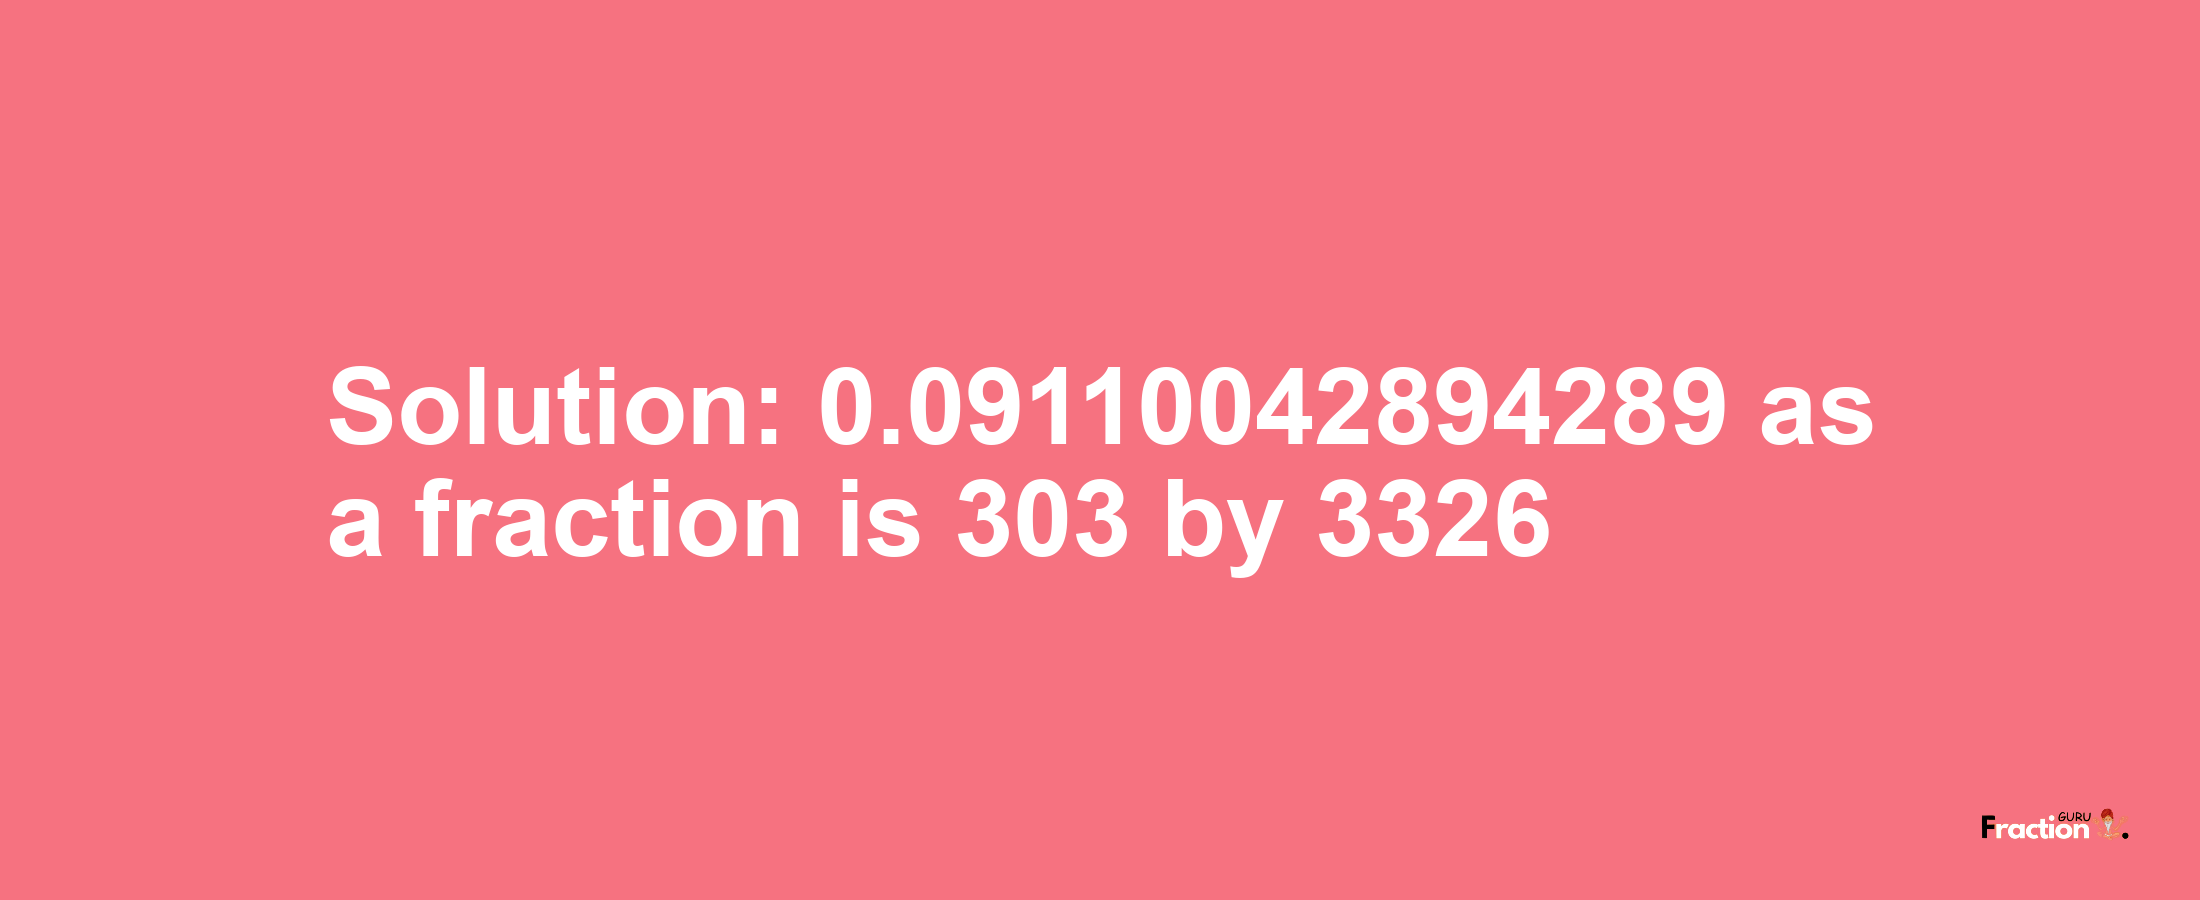 Solution:0.09110042894289 as a fraction is 303/3326